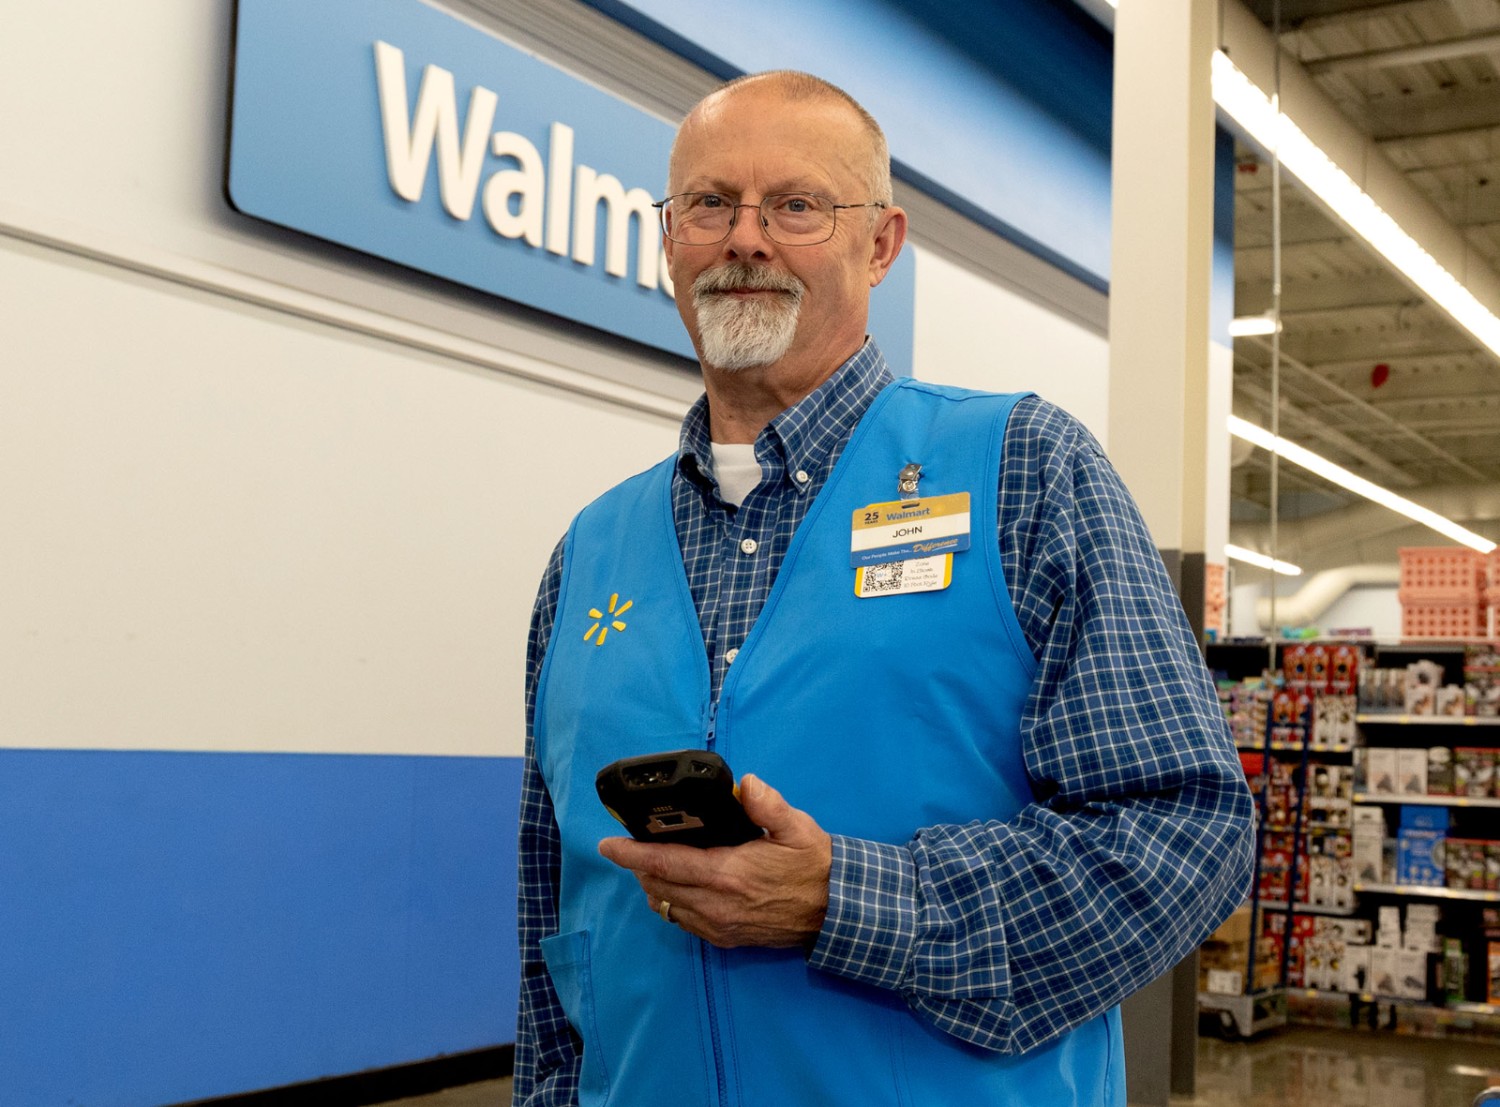 Walmart Incorporated is the worlds largest